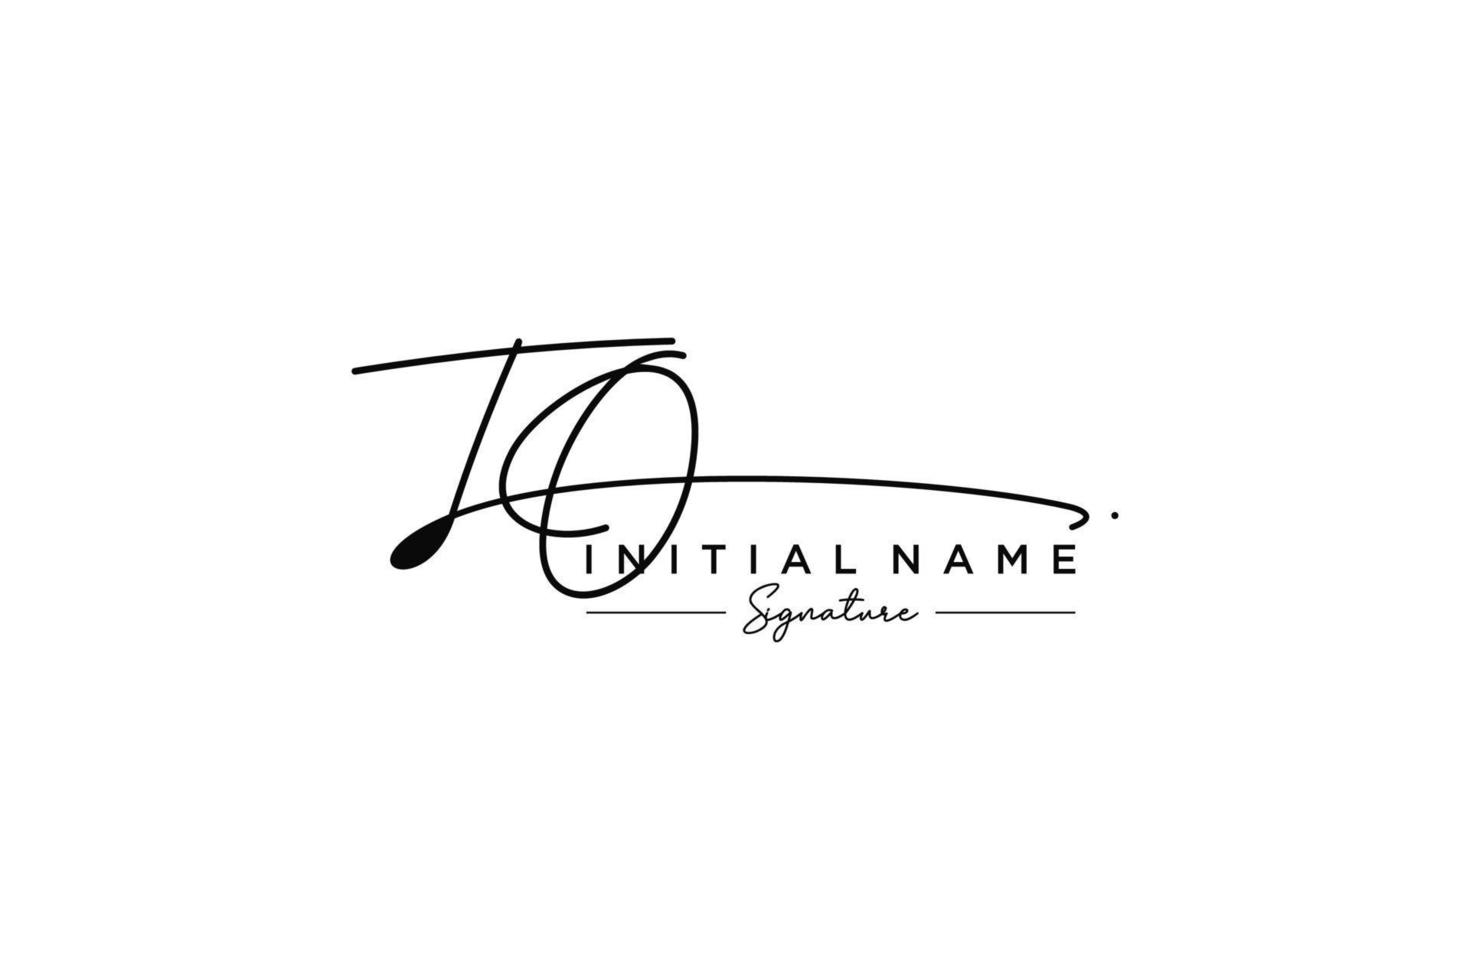 Initial TO signature logo template vector. Hand drawn Calligraphy lettering Vector illustration.